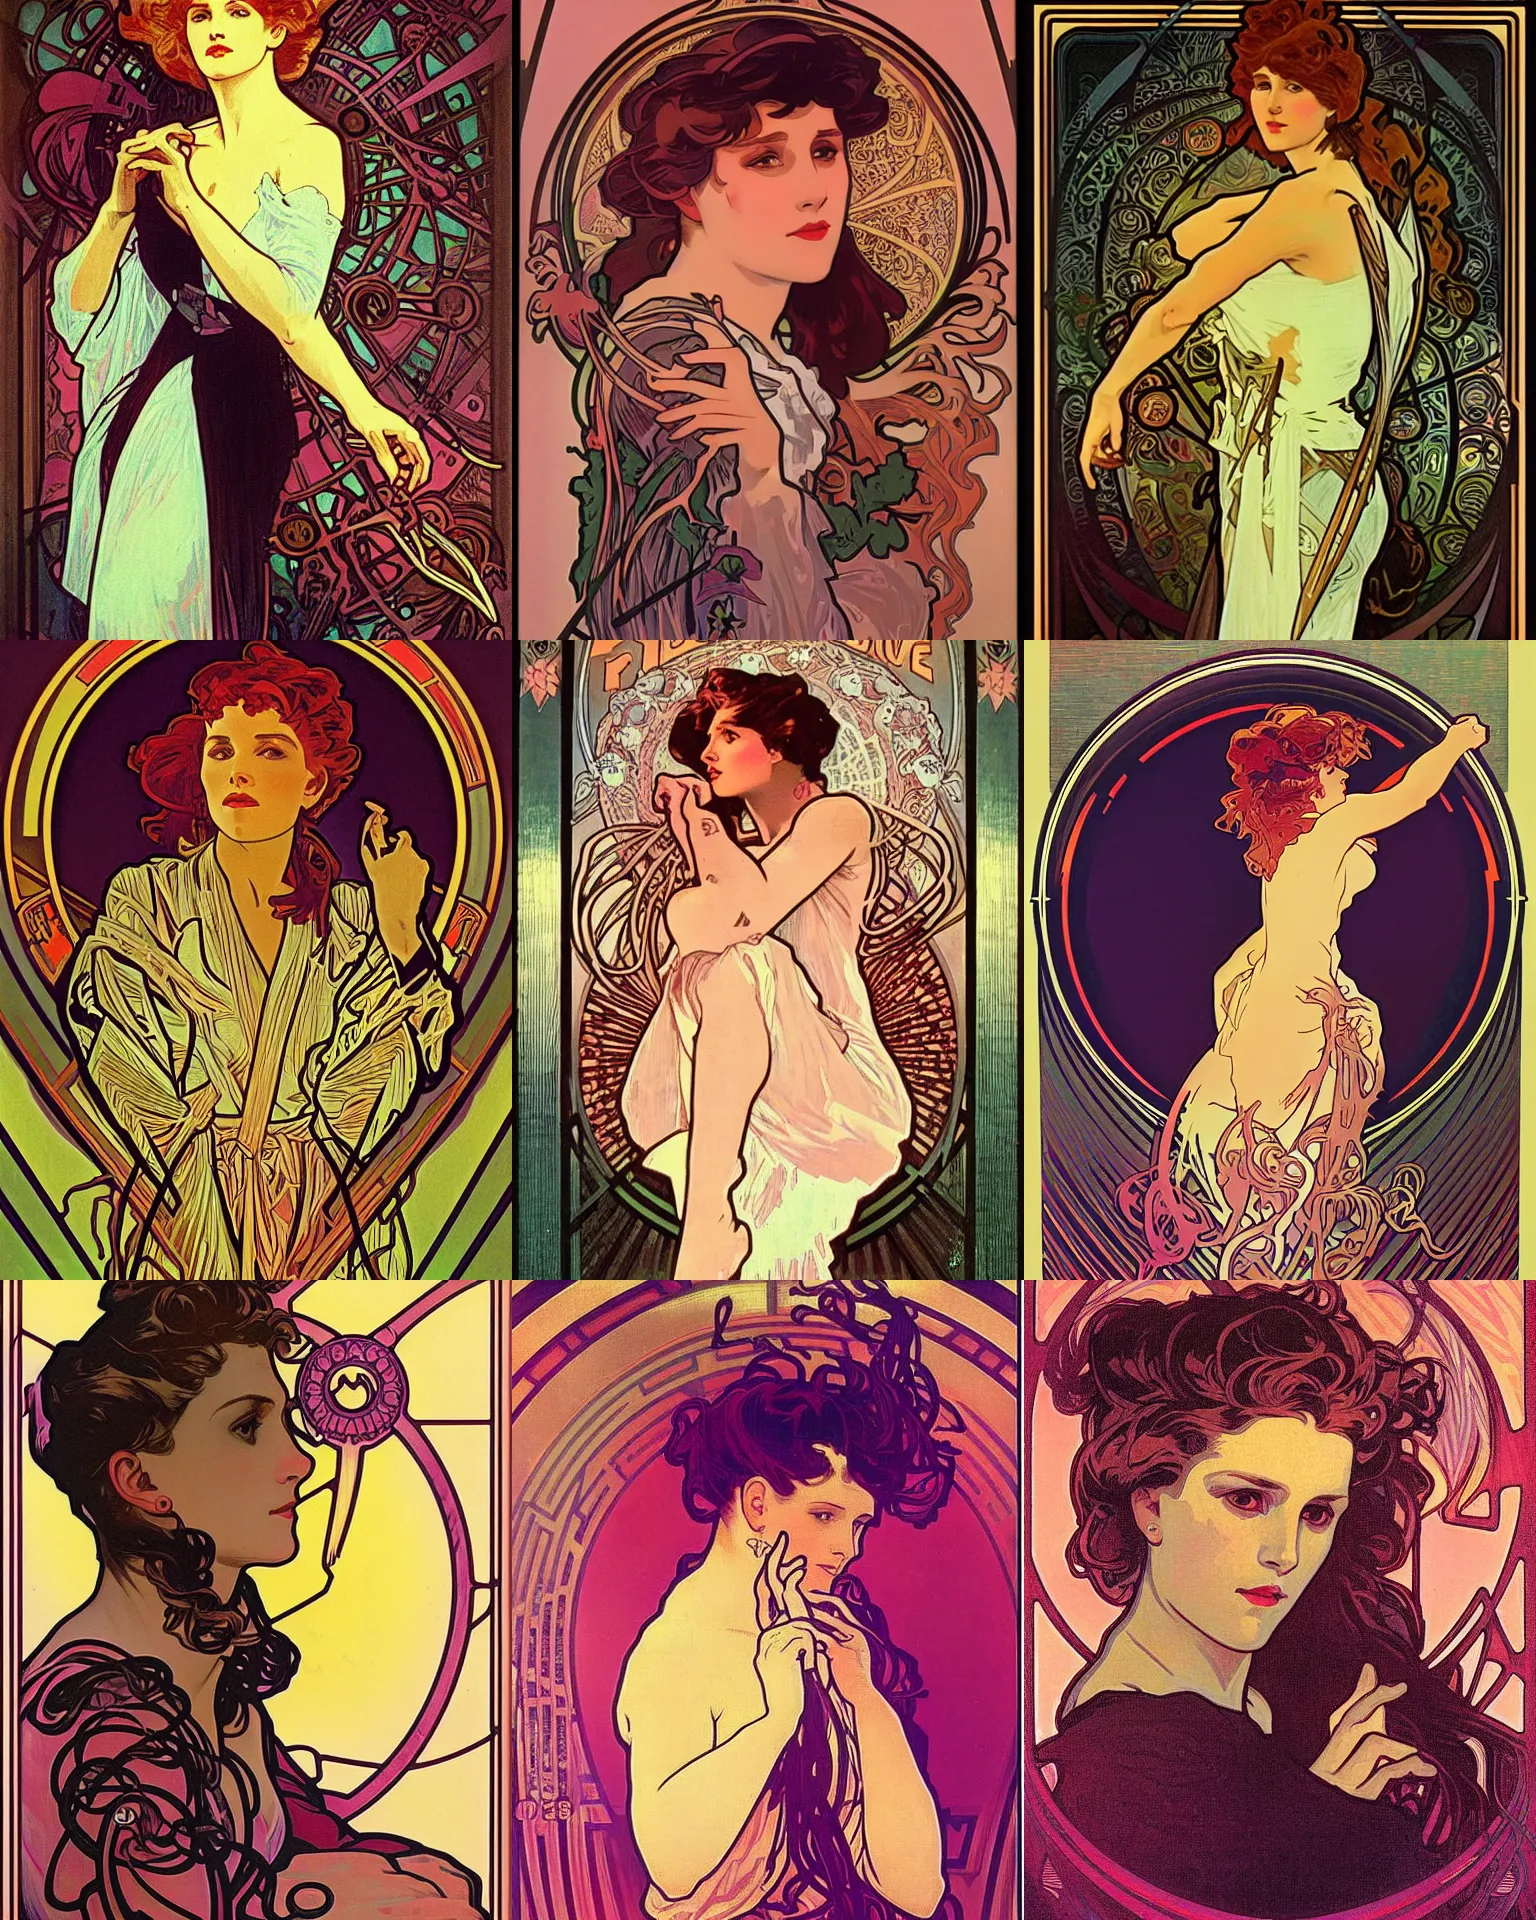 Prompt: A synthwave portrait by Alphonse Mucha